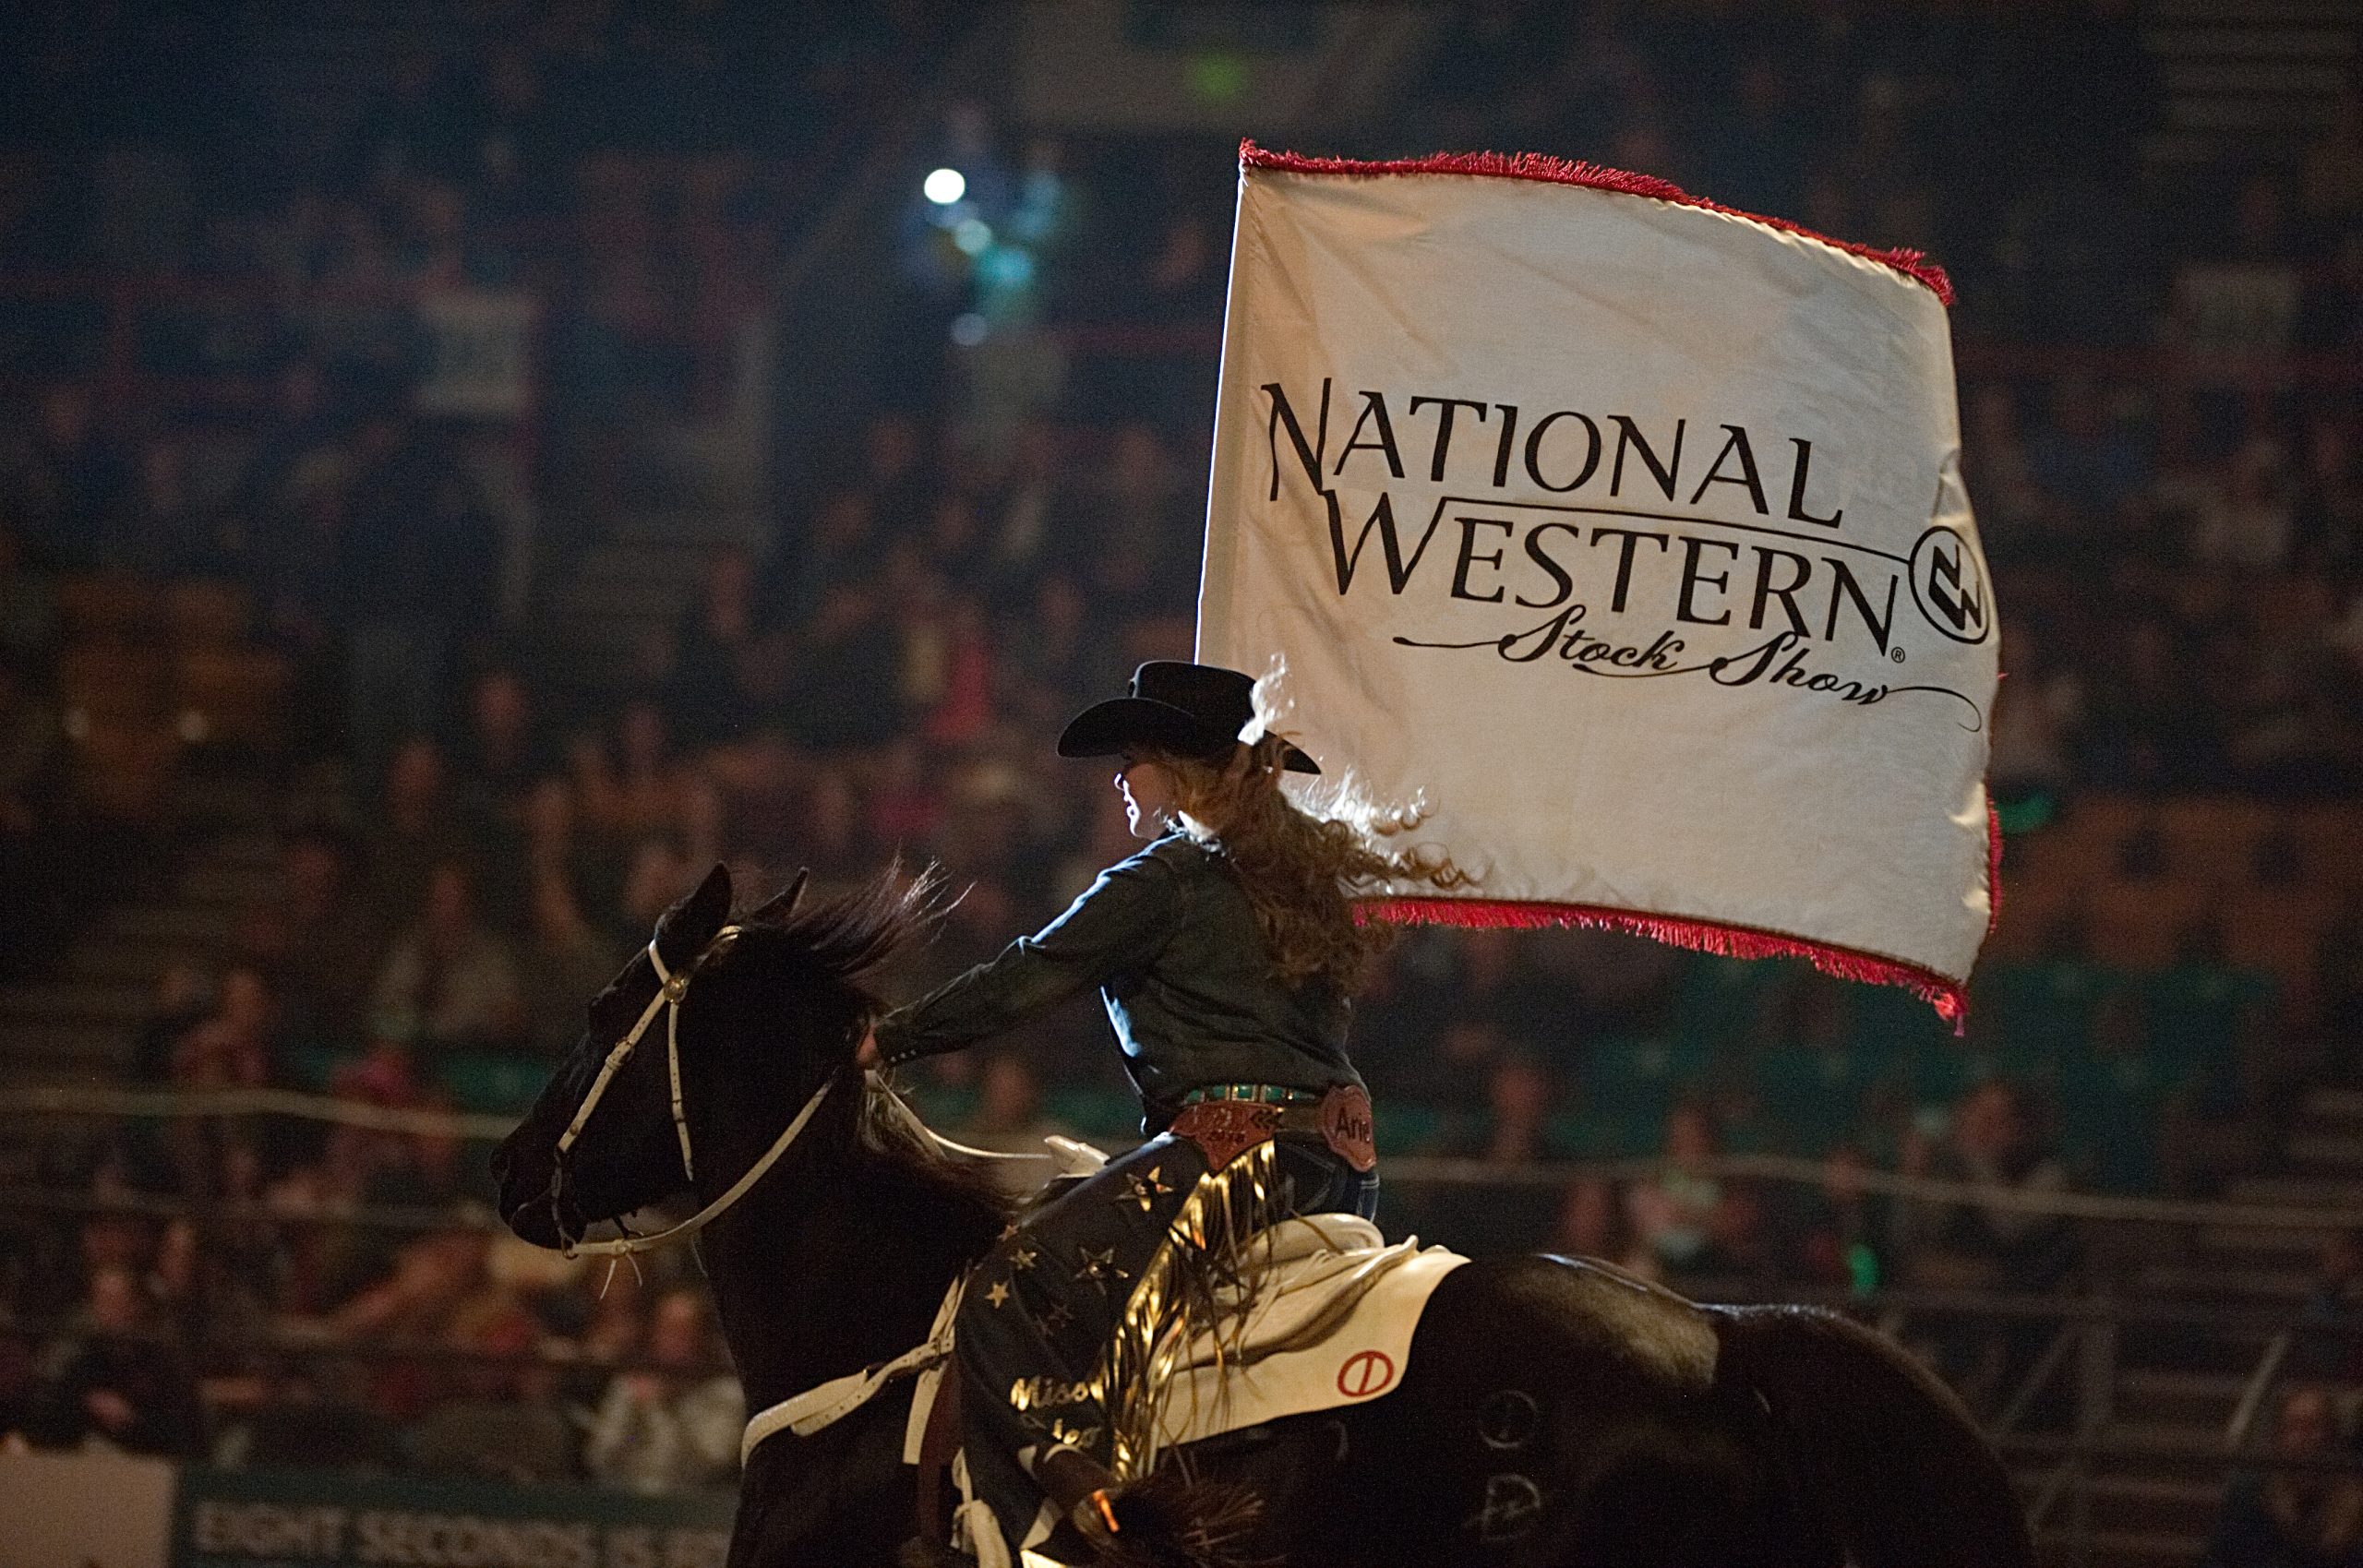 National Western Stock Show